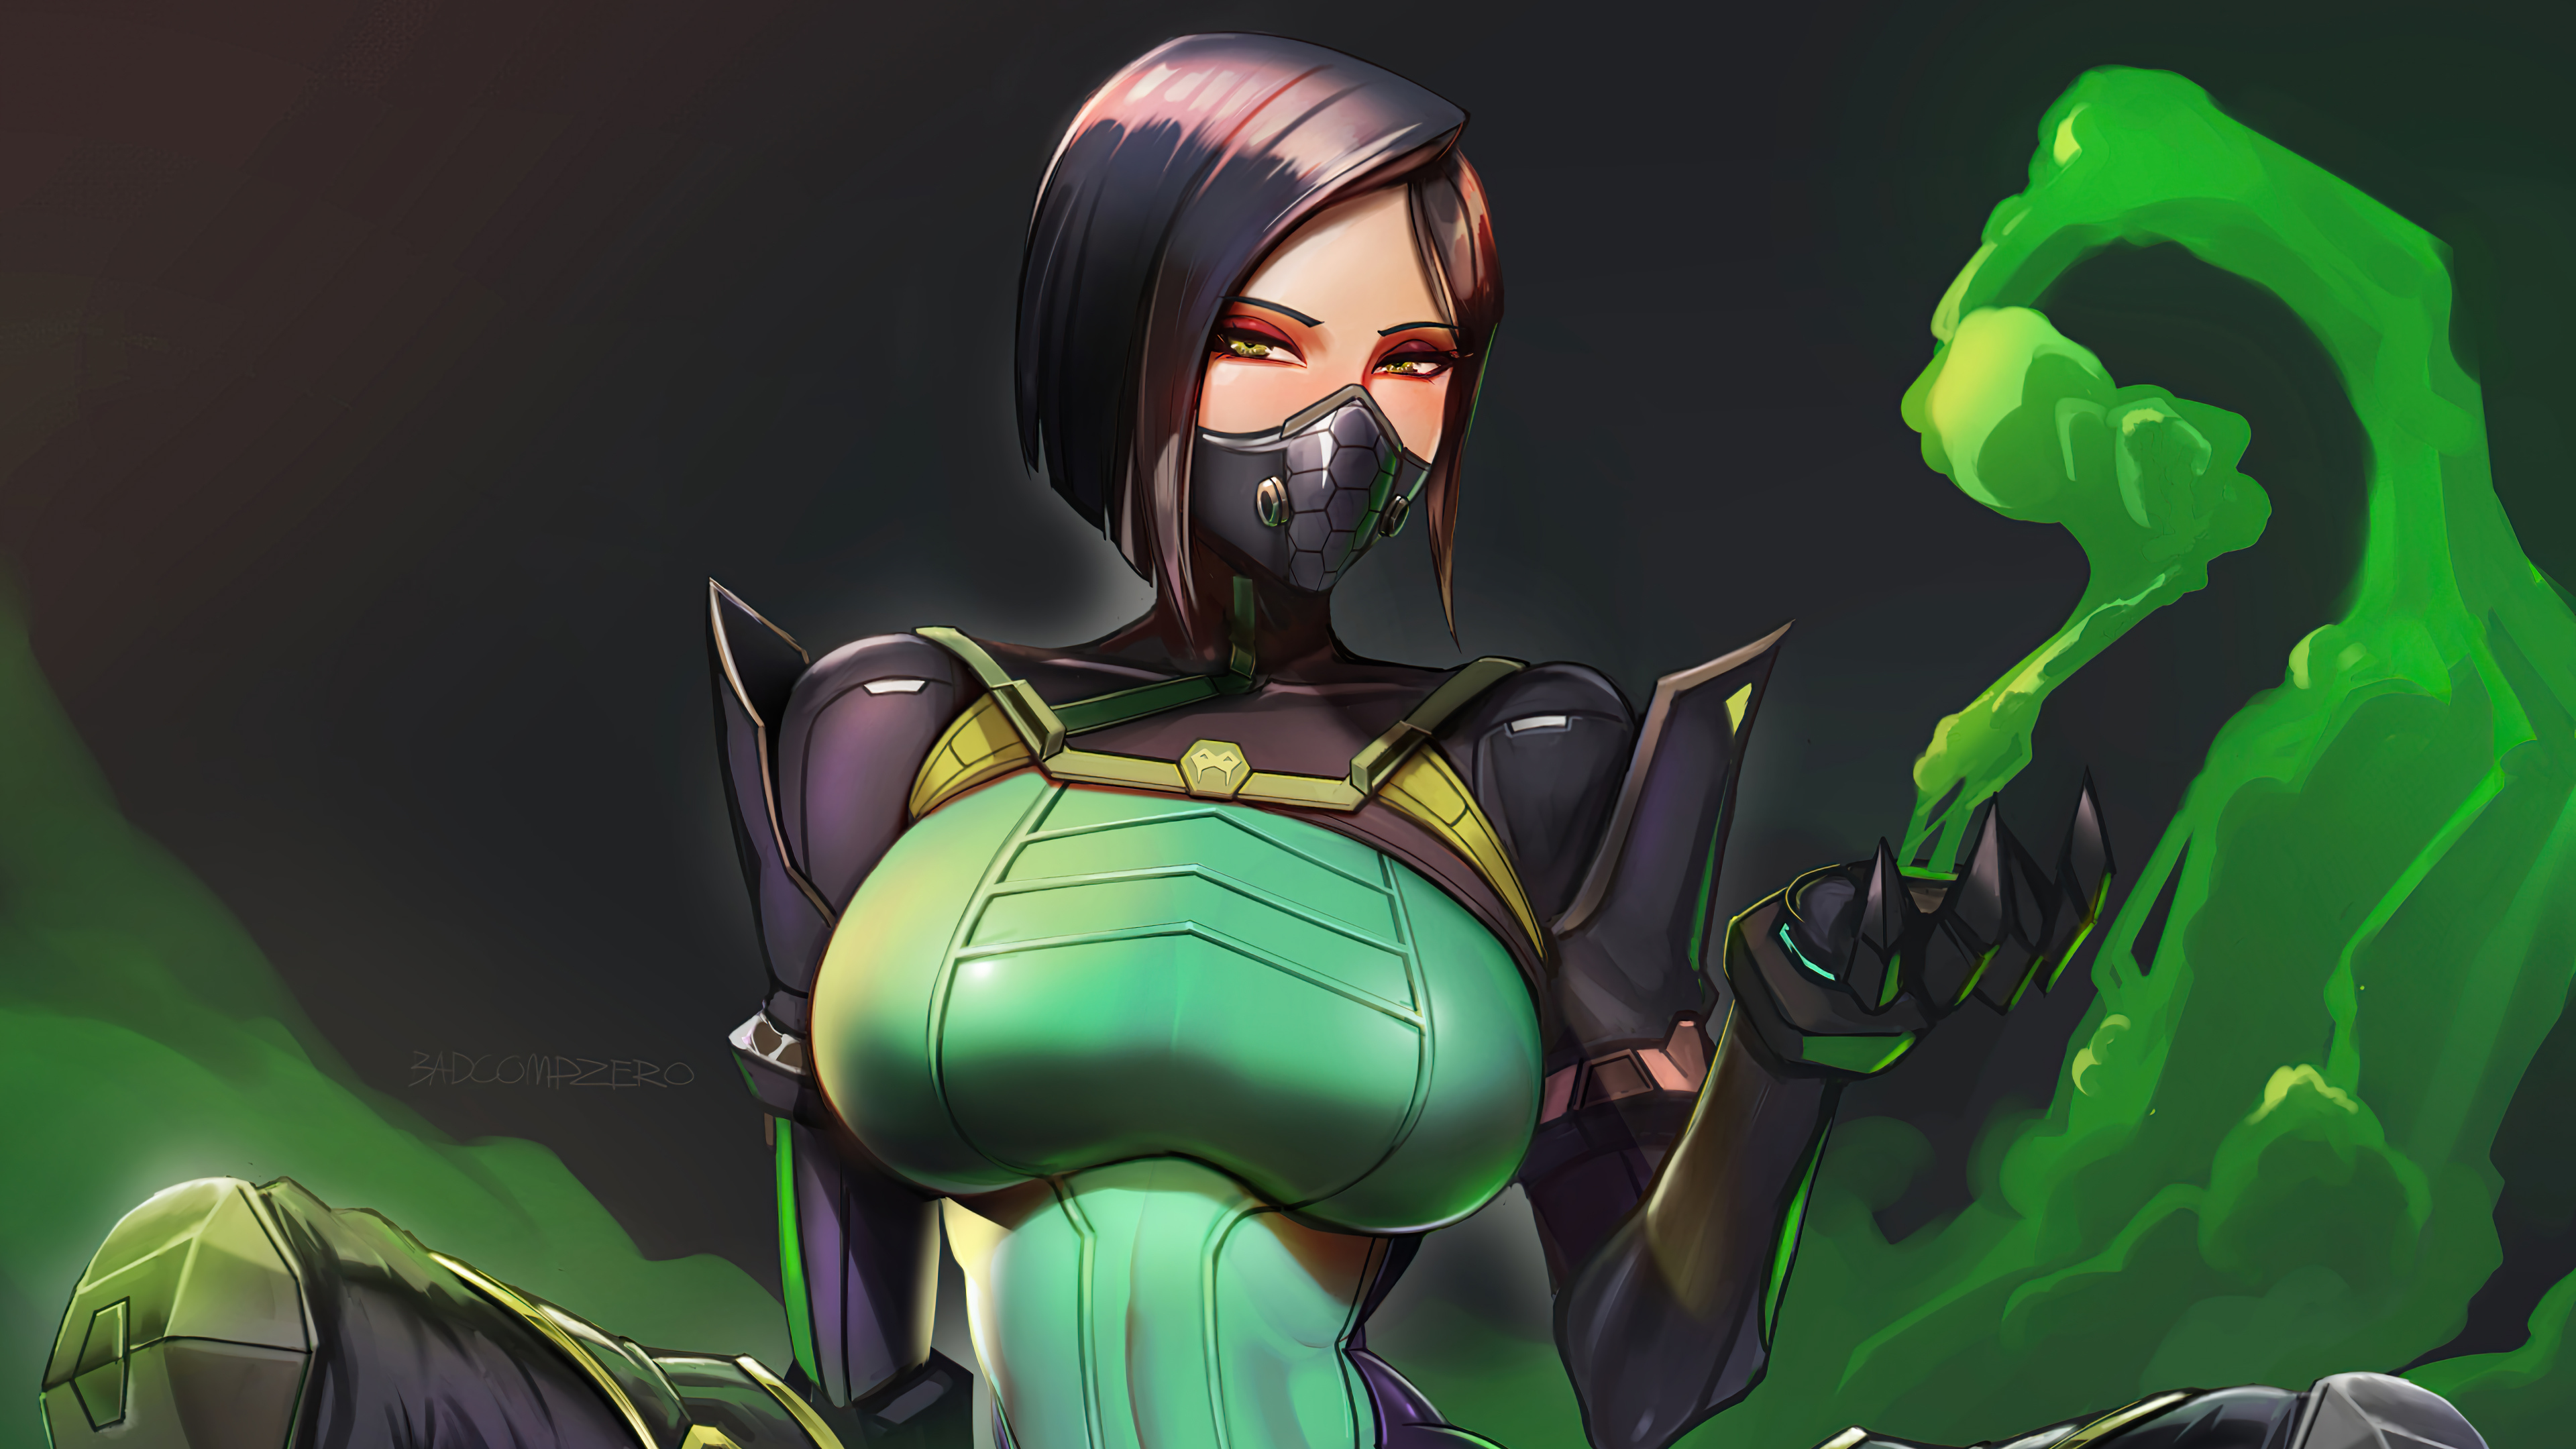 Viper (Valorant): Viper in Valorant is not just a deadly snake, but also a formidable force in the game with her toxic abilities. Check out her gameplay in the link attached, and learn how to dominate your opponents on the battlefield with her.